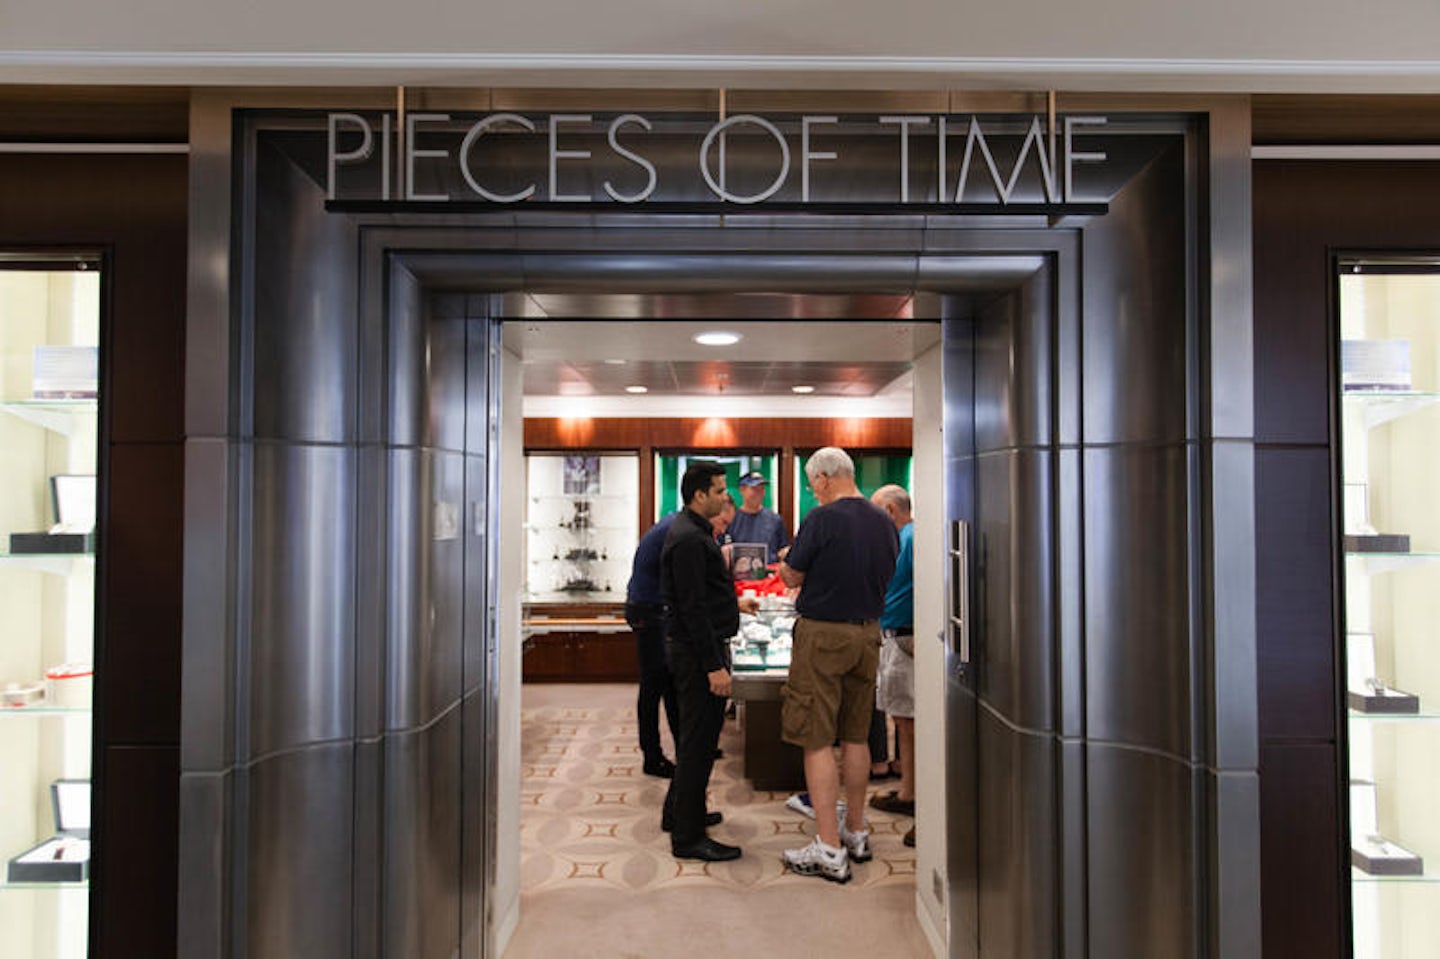 Pieces of Time on Celebrity Silhouette